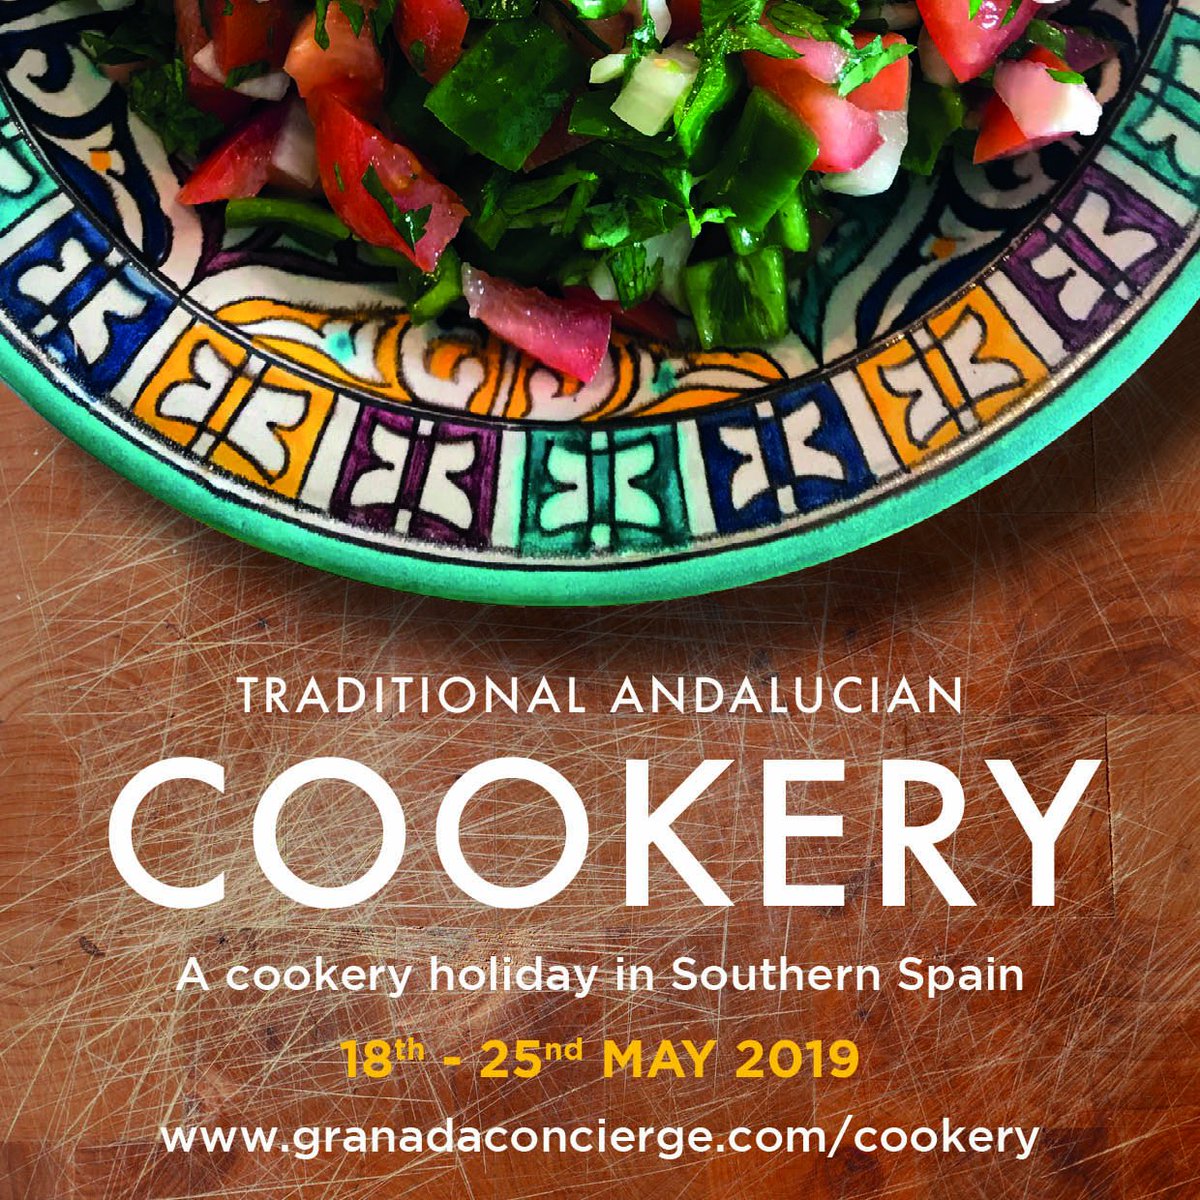 Spain is now officially the healthiest nation in the world! Learn how to cook healthy Spanish food on @CuratedGranada Cookery Course this Summer #cookerycourse #HealthyEating  bloomberg.com/news/articles/…